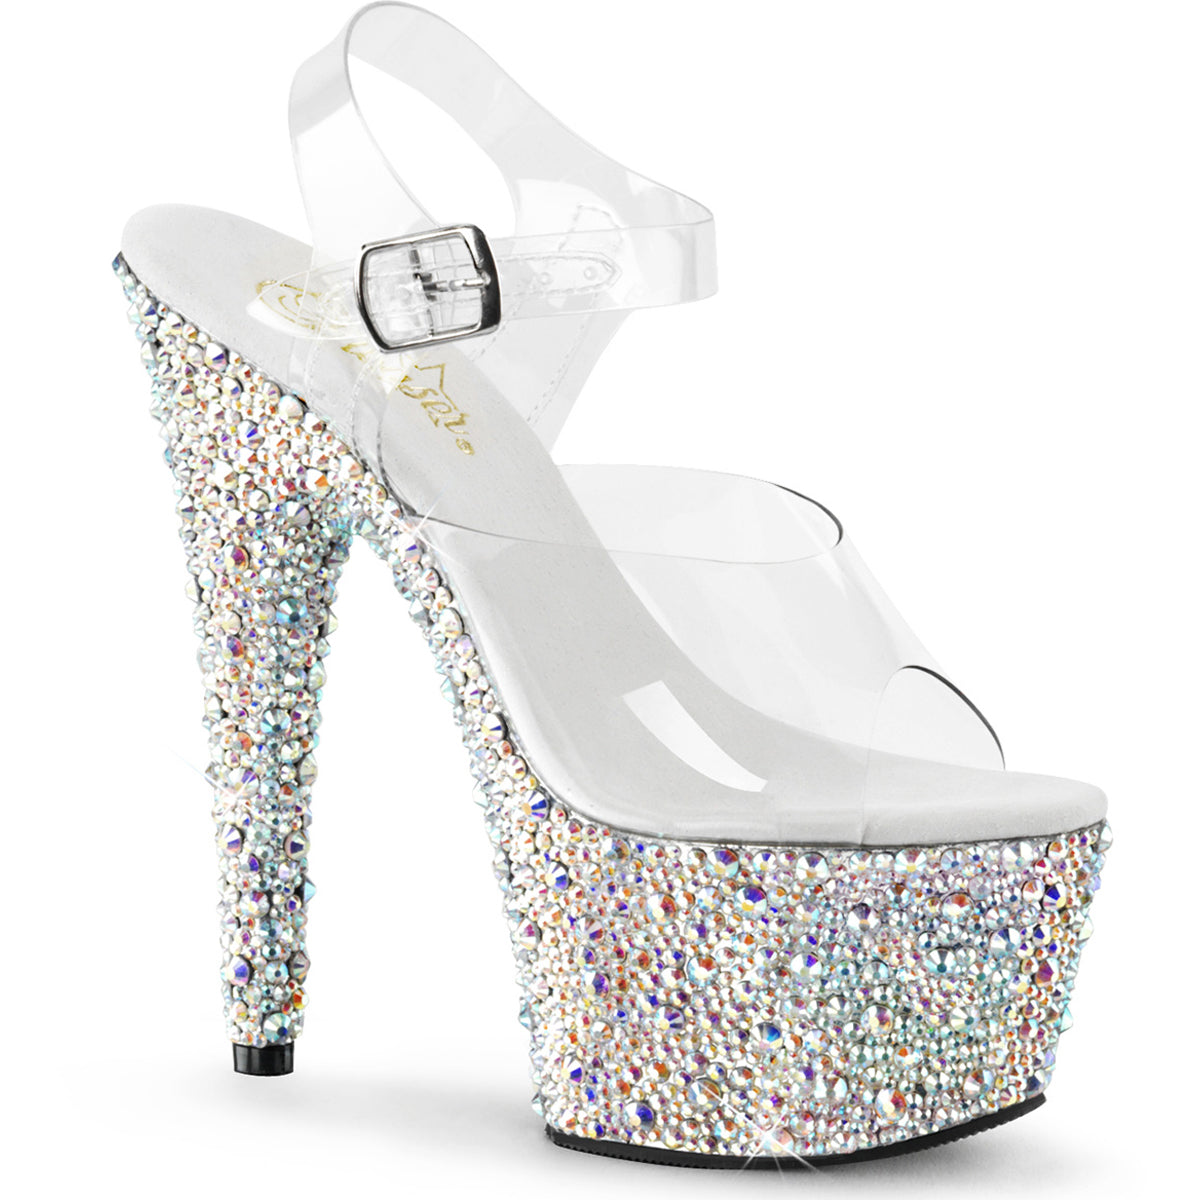 Sexy Ice Bling Rhinestone Platform Sandals Stripper High Heels Shoes Pleaser Pleaser BEJEWELED/708MS